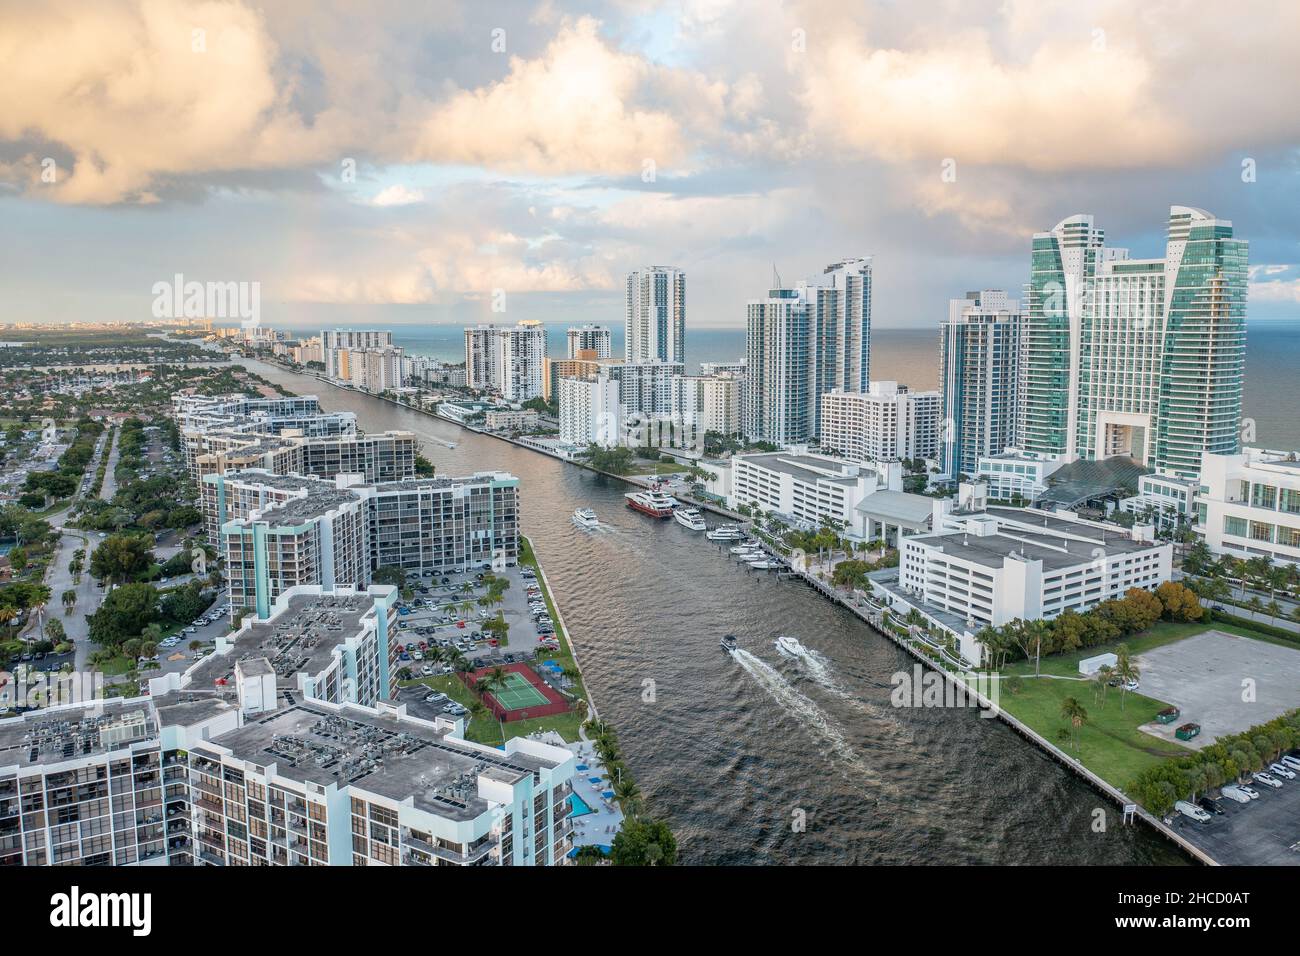 Hallandale and Miami Beach Florida after a Storm Stock Photo